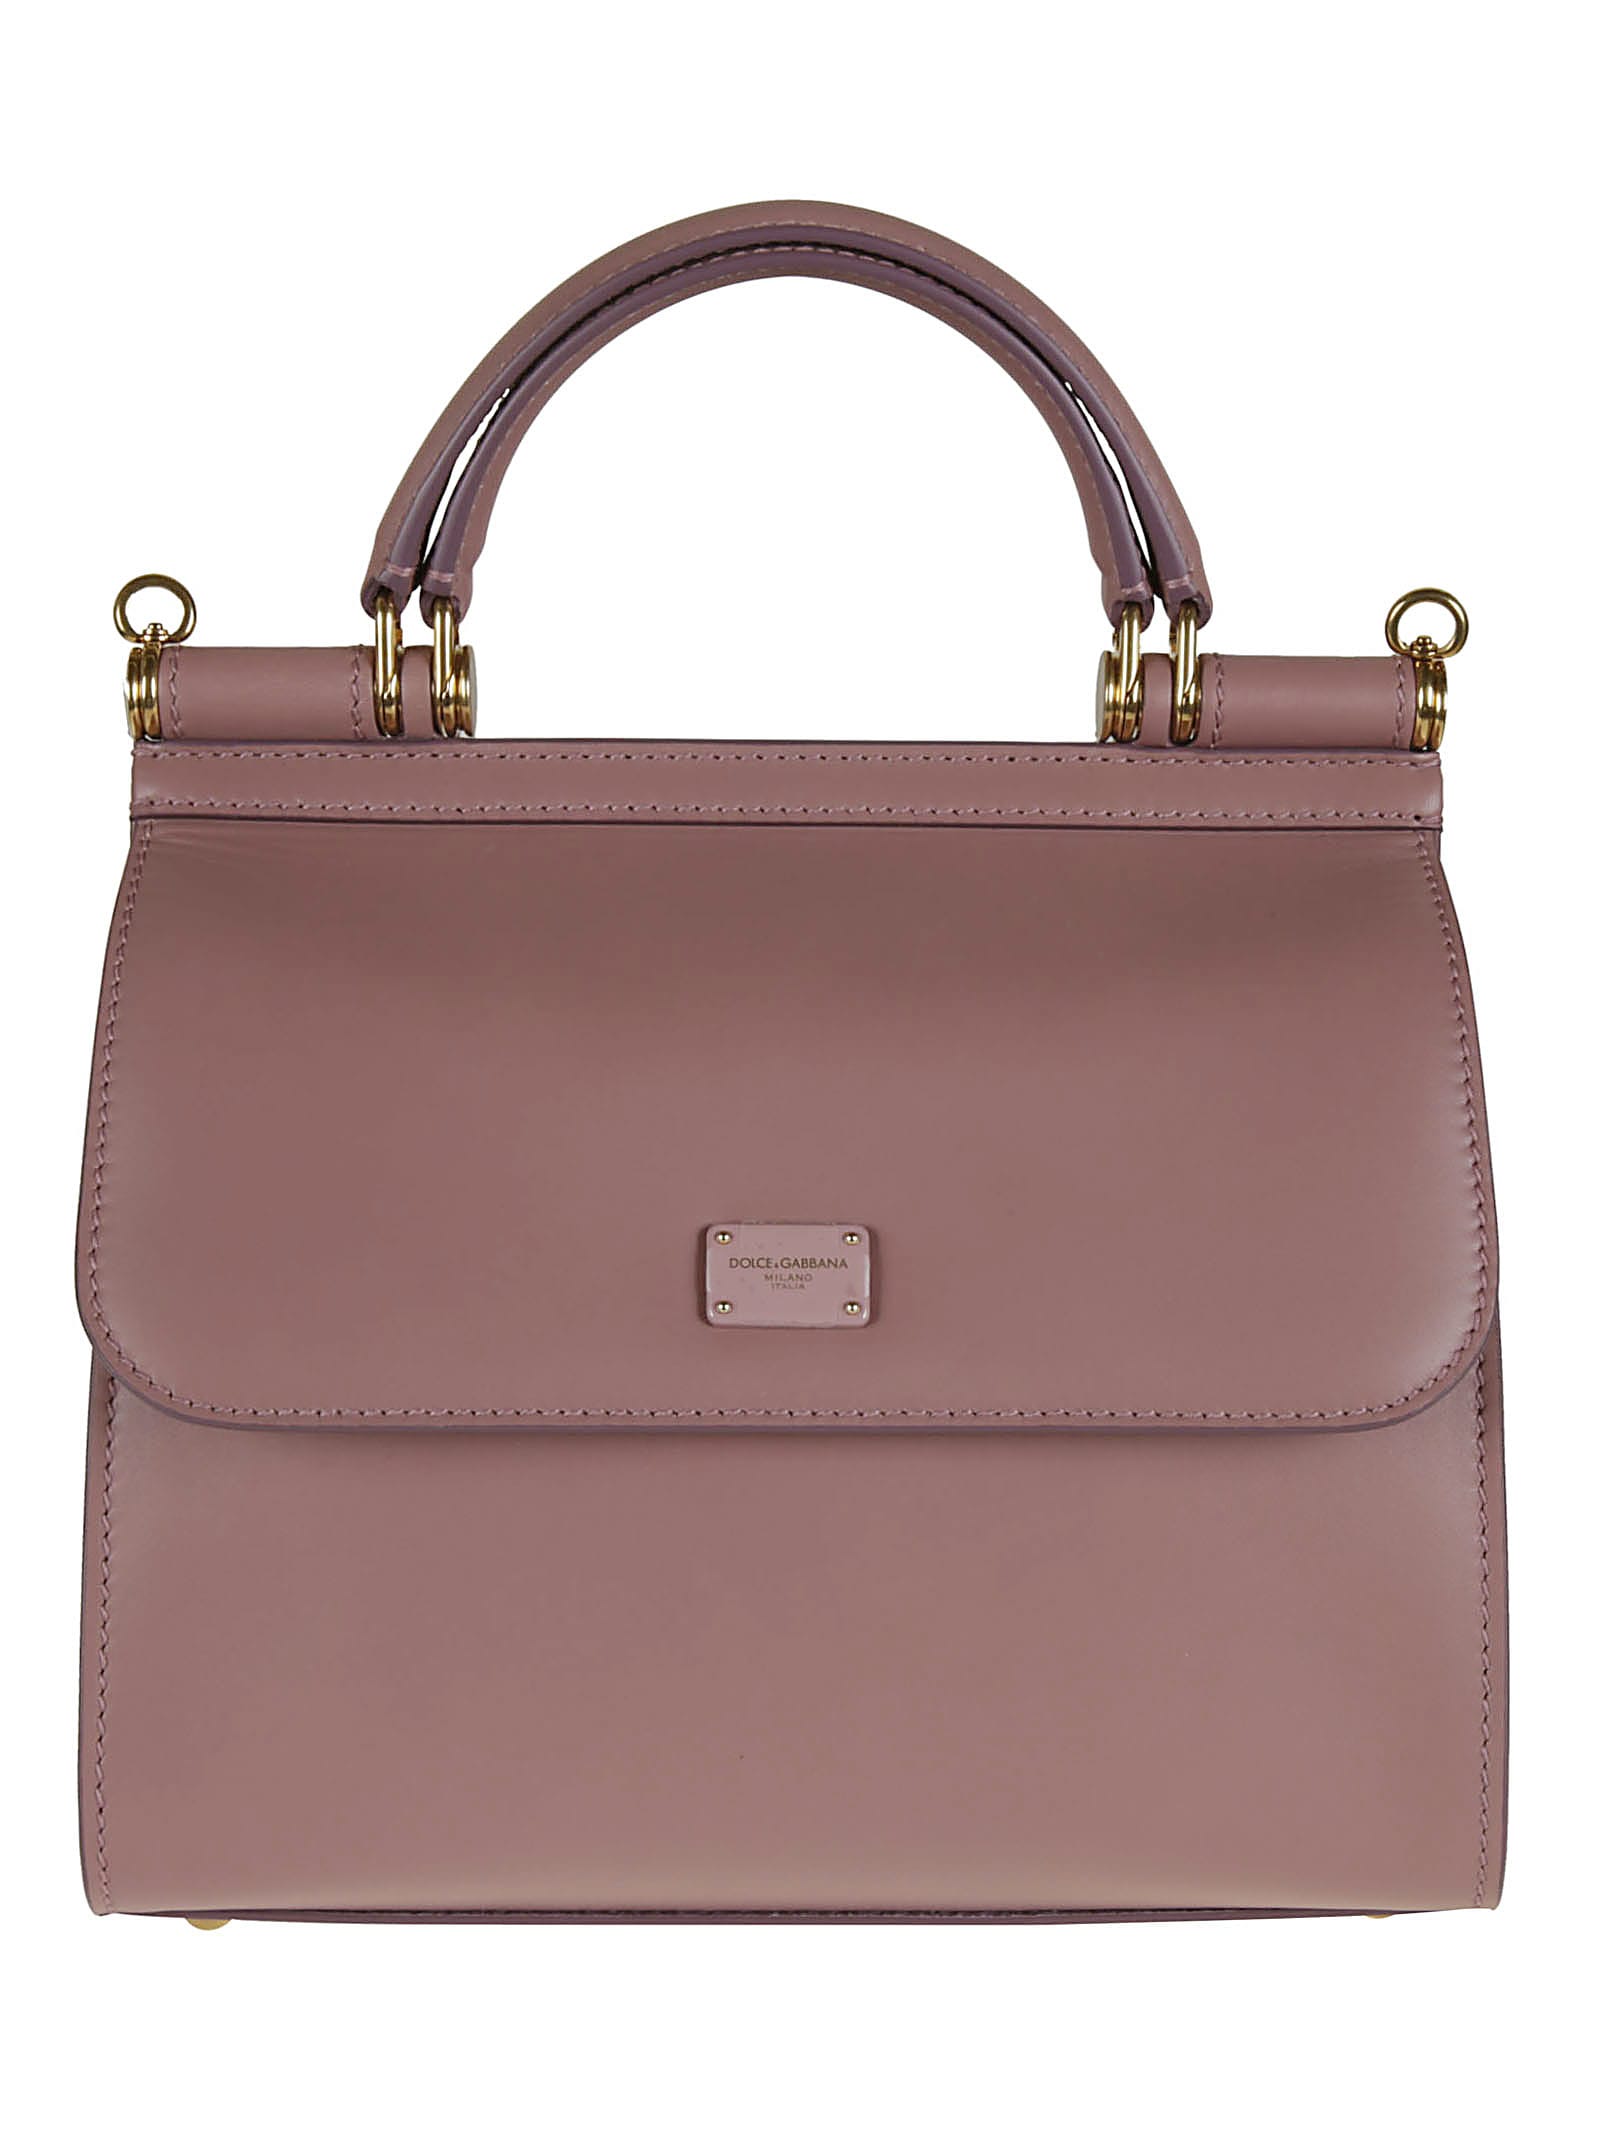 Dolce & Gabbana Flap Tote In Pink